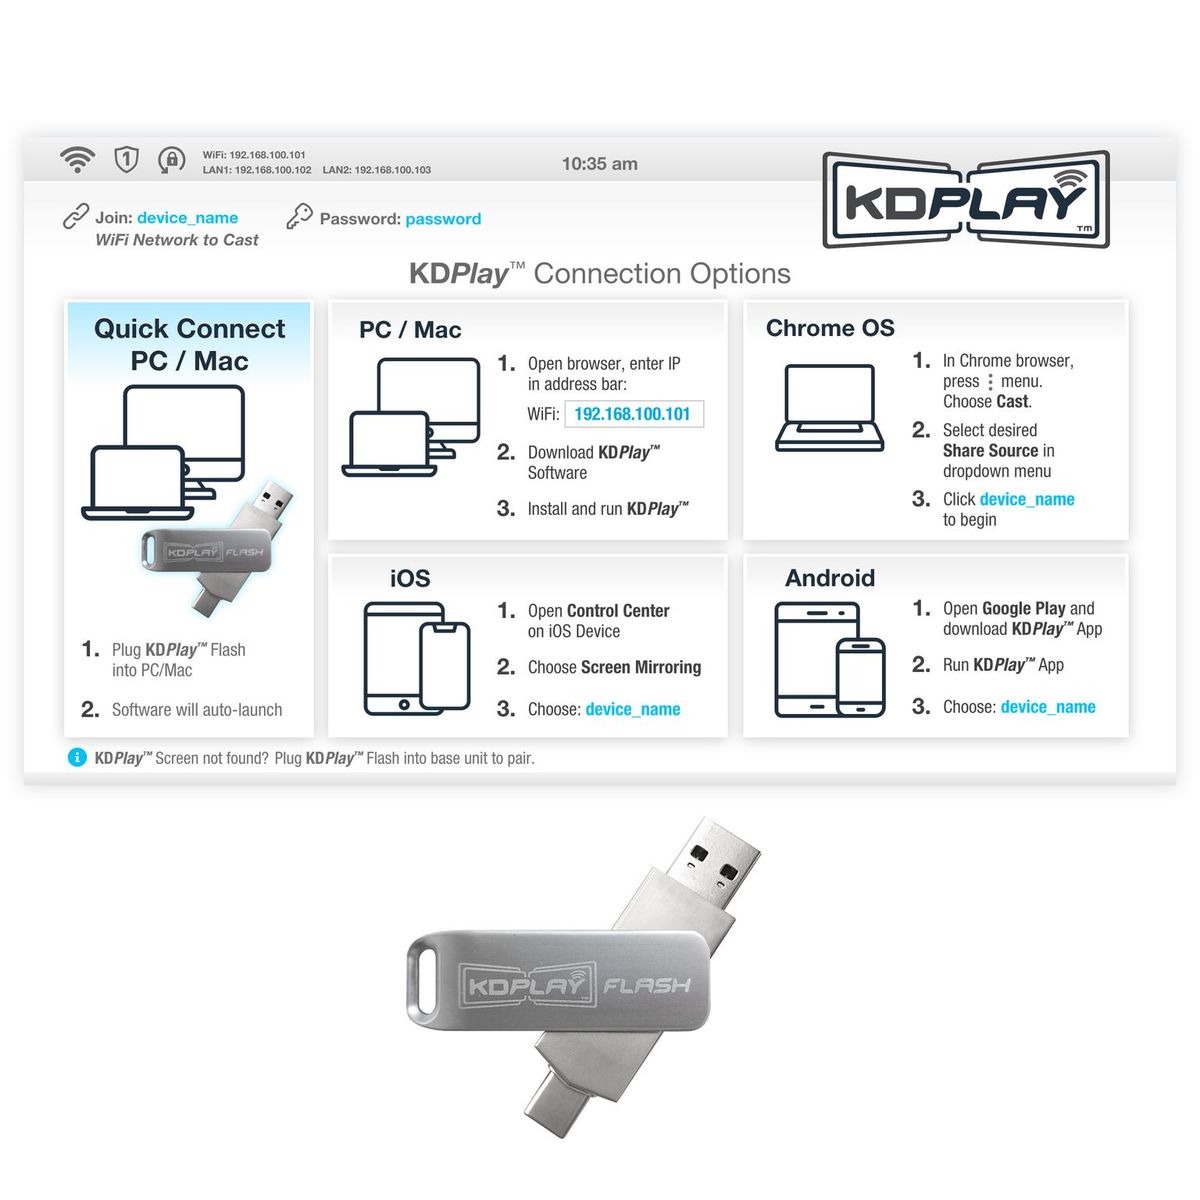 Thumbnail of Example Diagram showing KDPlay connection option of the wireless presentation system